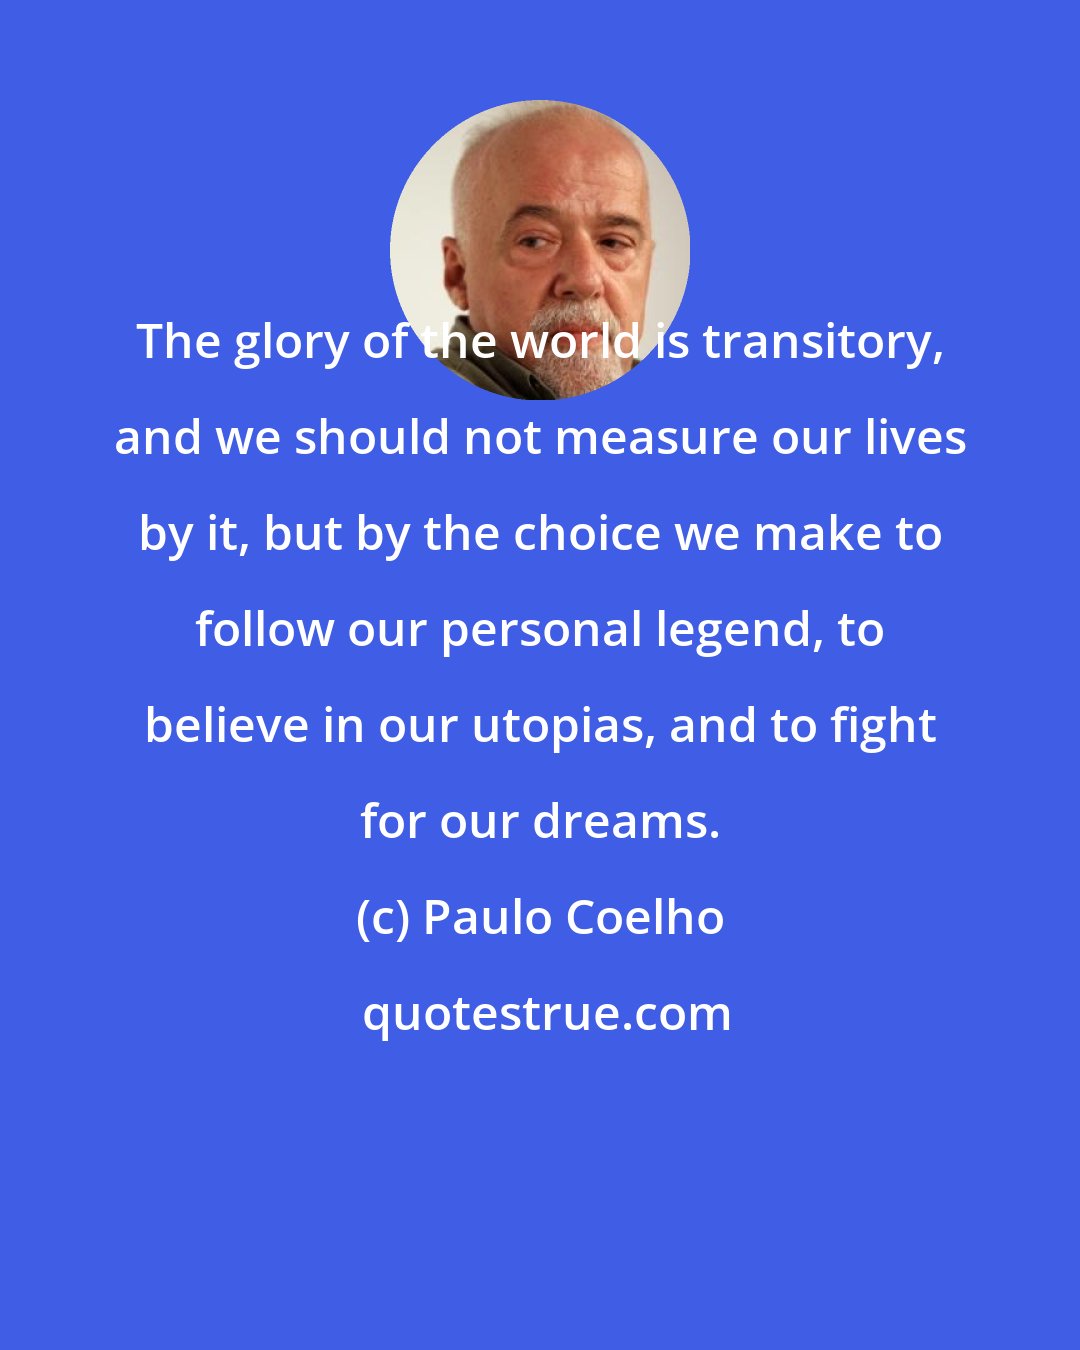 Paulo Coelho: The glory of the world is transitory, and we should not measure our lives by it, but by the choice we make to follow our personal legend, to believe in our utopias, and to fight for our dreams.